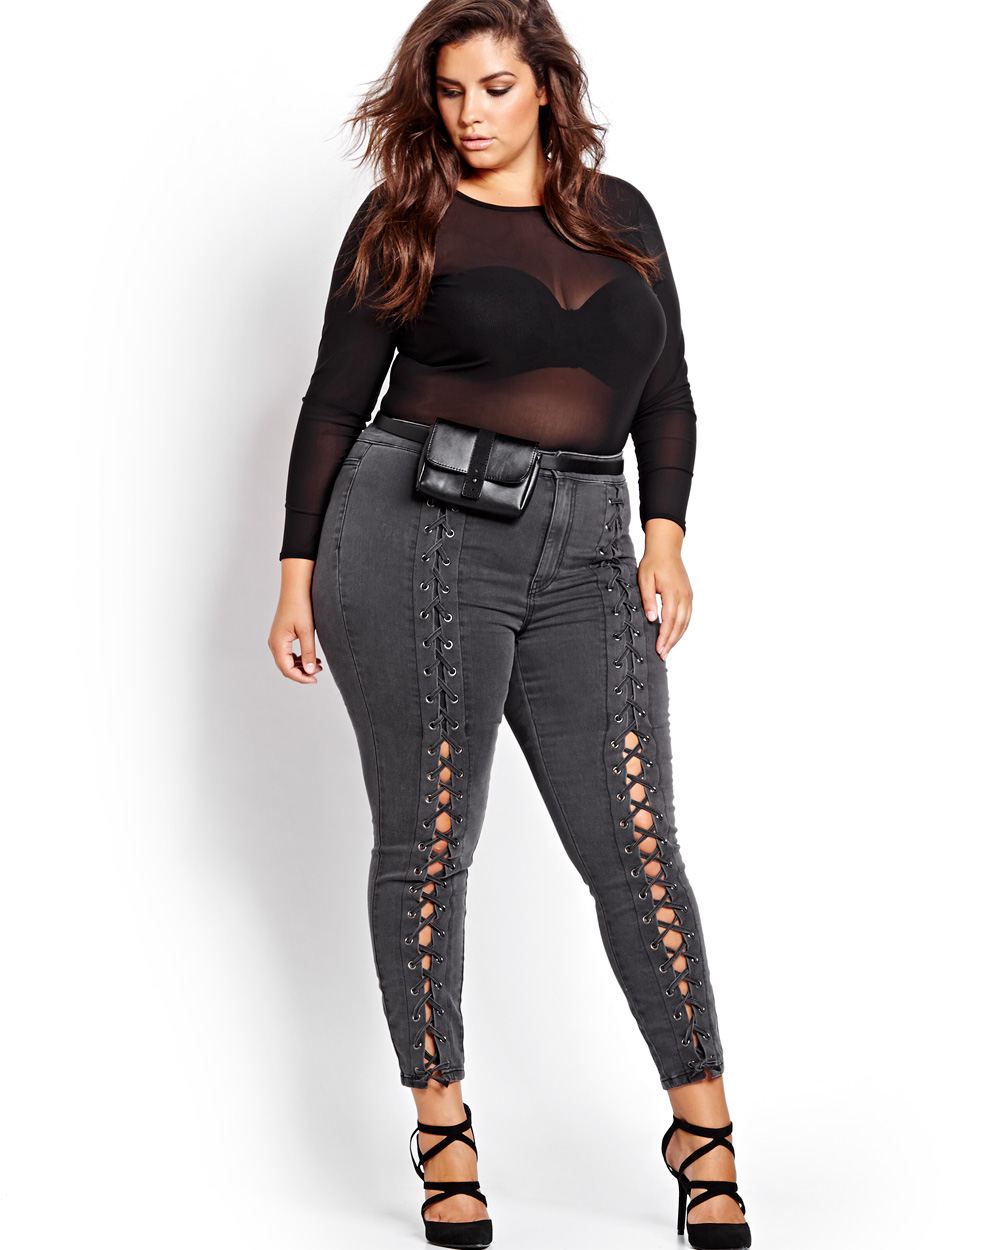 sexy plus size outfits